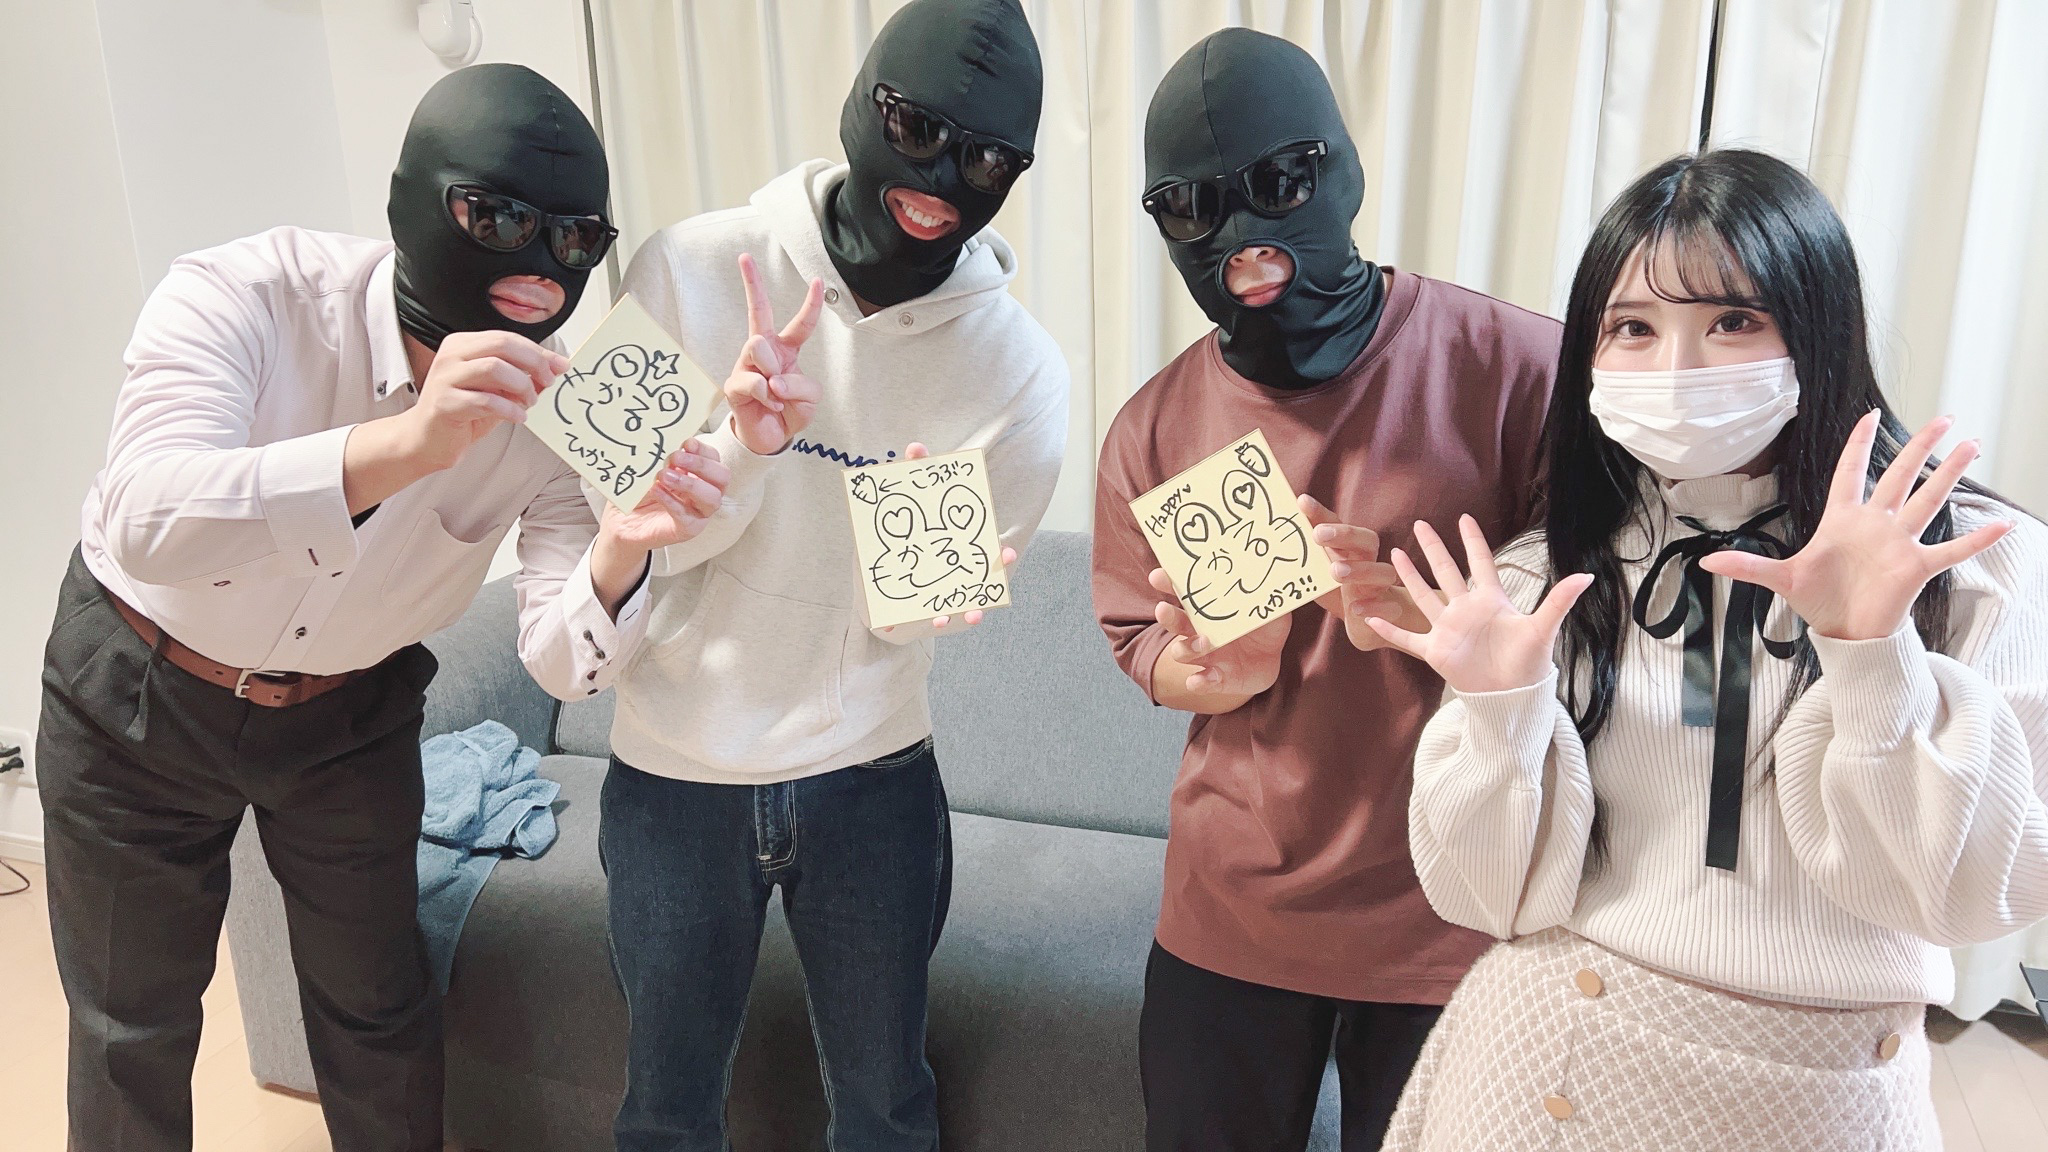 FC2-PPV-3129824 Surprise from Hikaru-chan entertainment community! A game for adults with real participation from virgins. If you win, you will get Ran 〇NN + autograph. If you lose, you will receive a bukkake member (crying).* There will be an autograph gift for the purchaser.